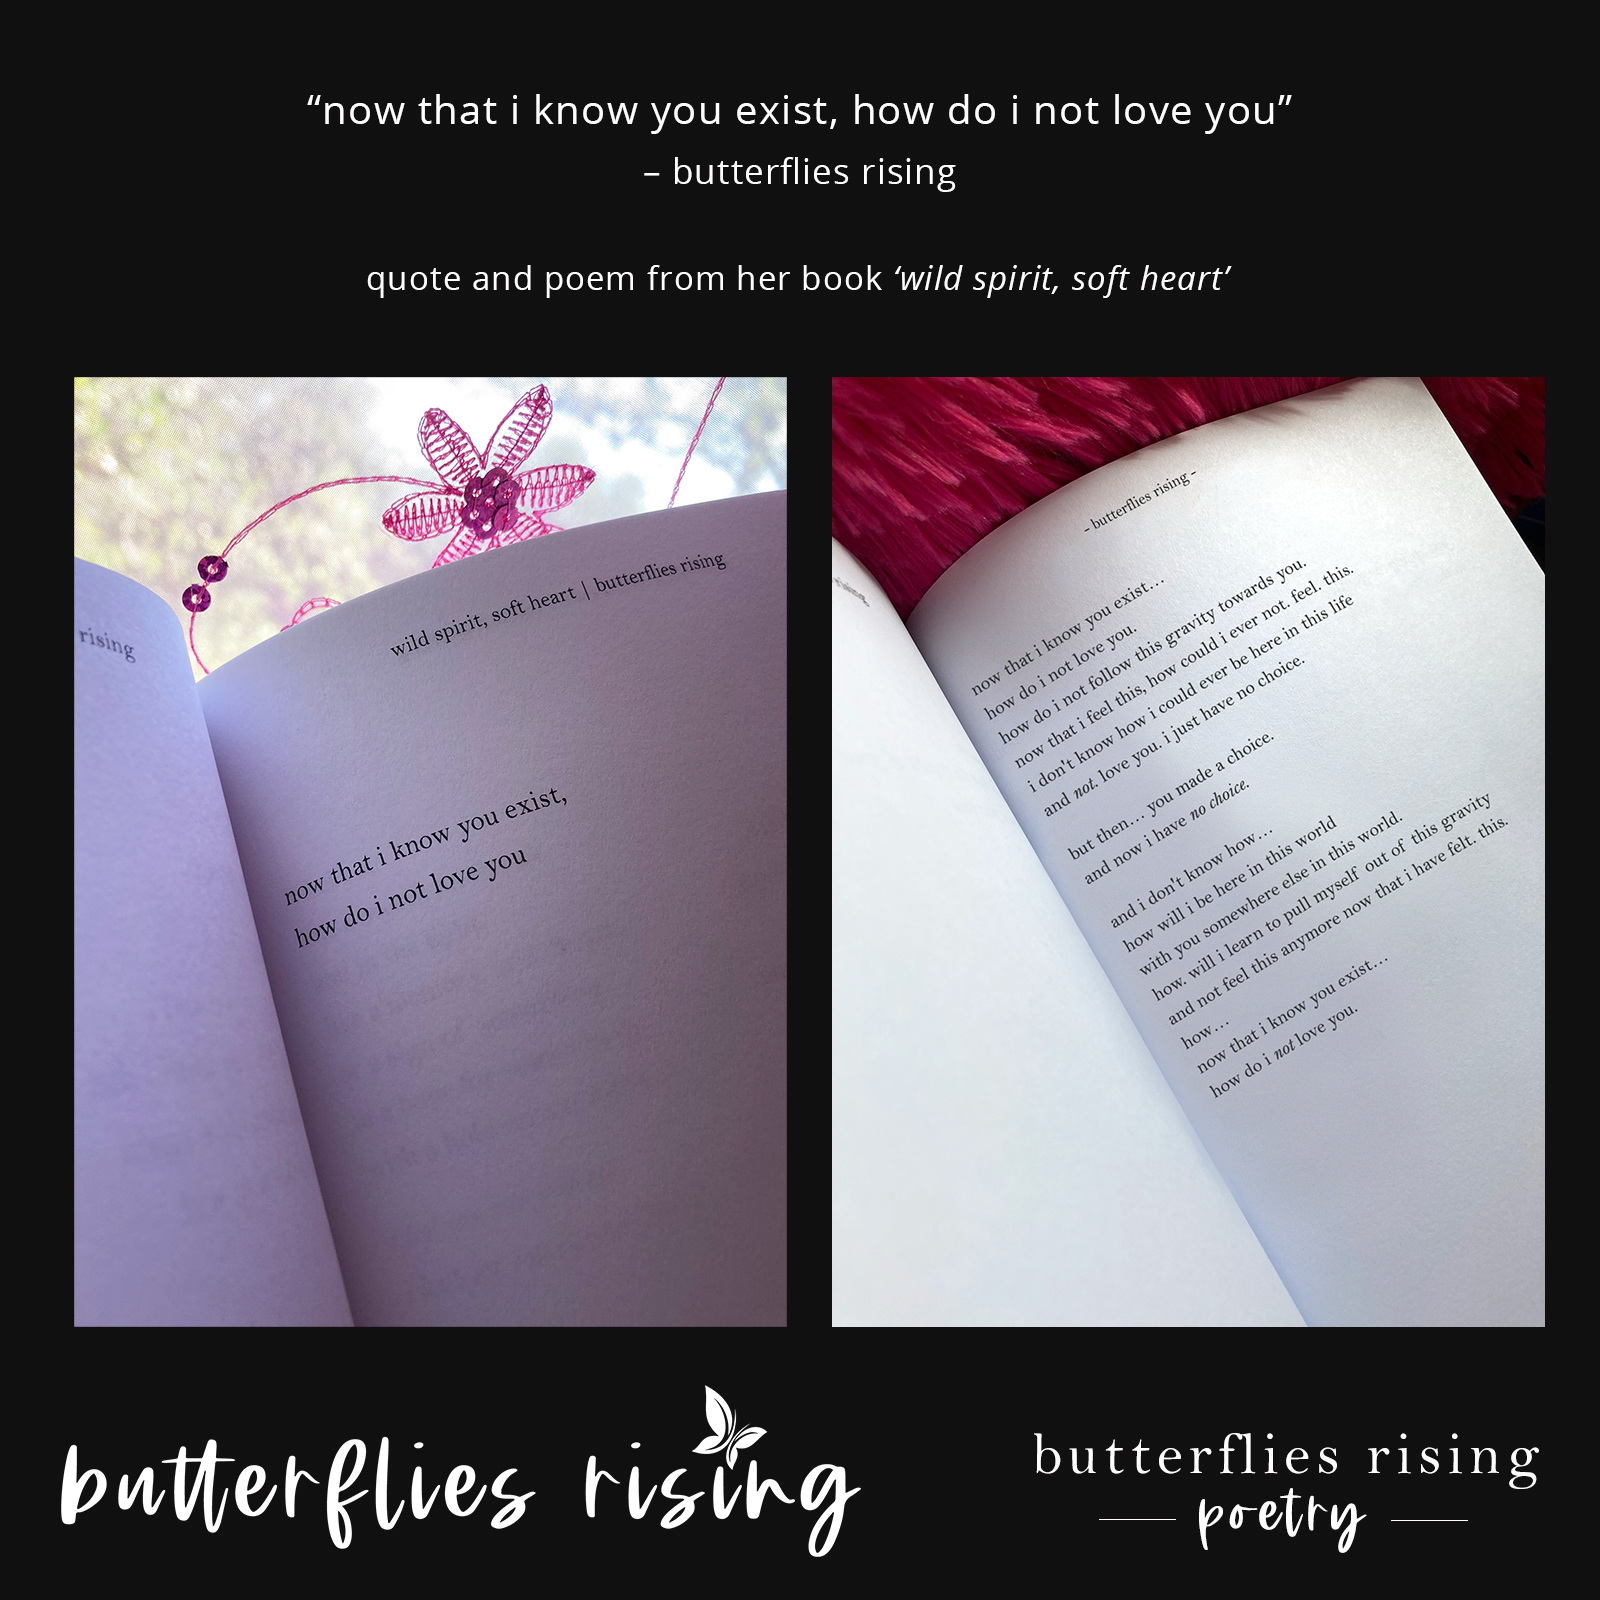 now that i know you exist, how do i not love you - butterflies rising